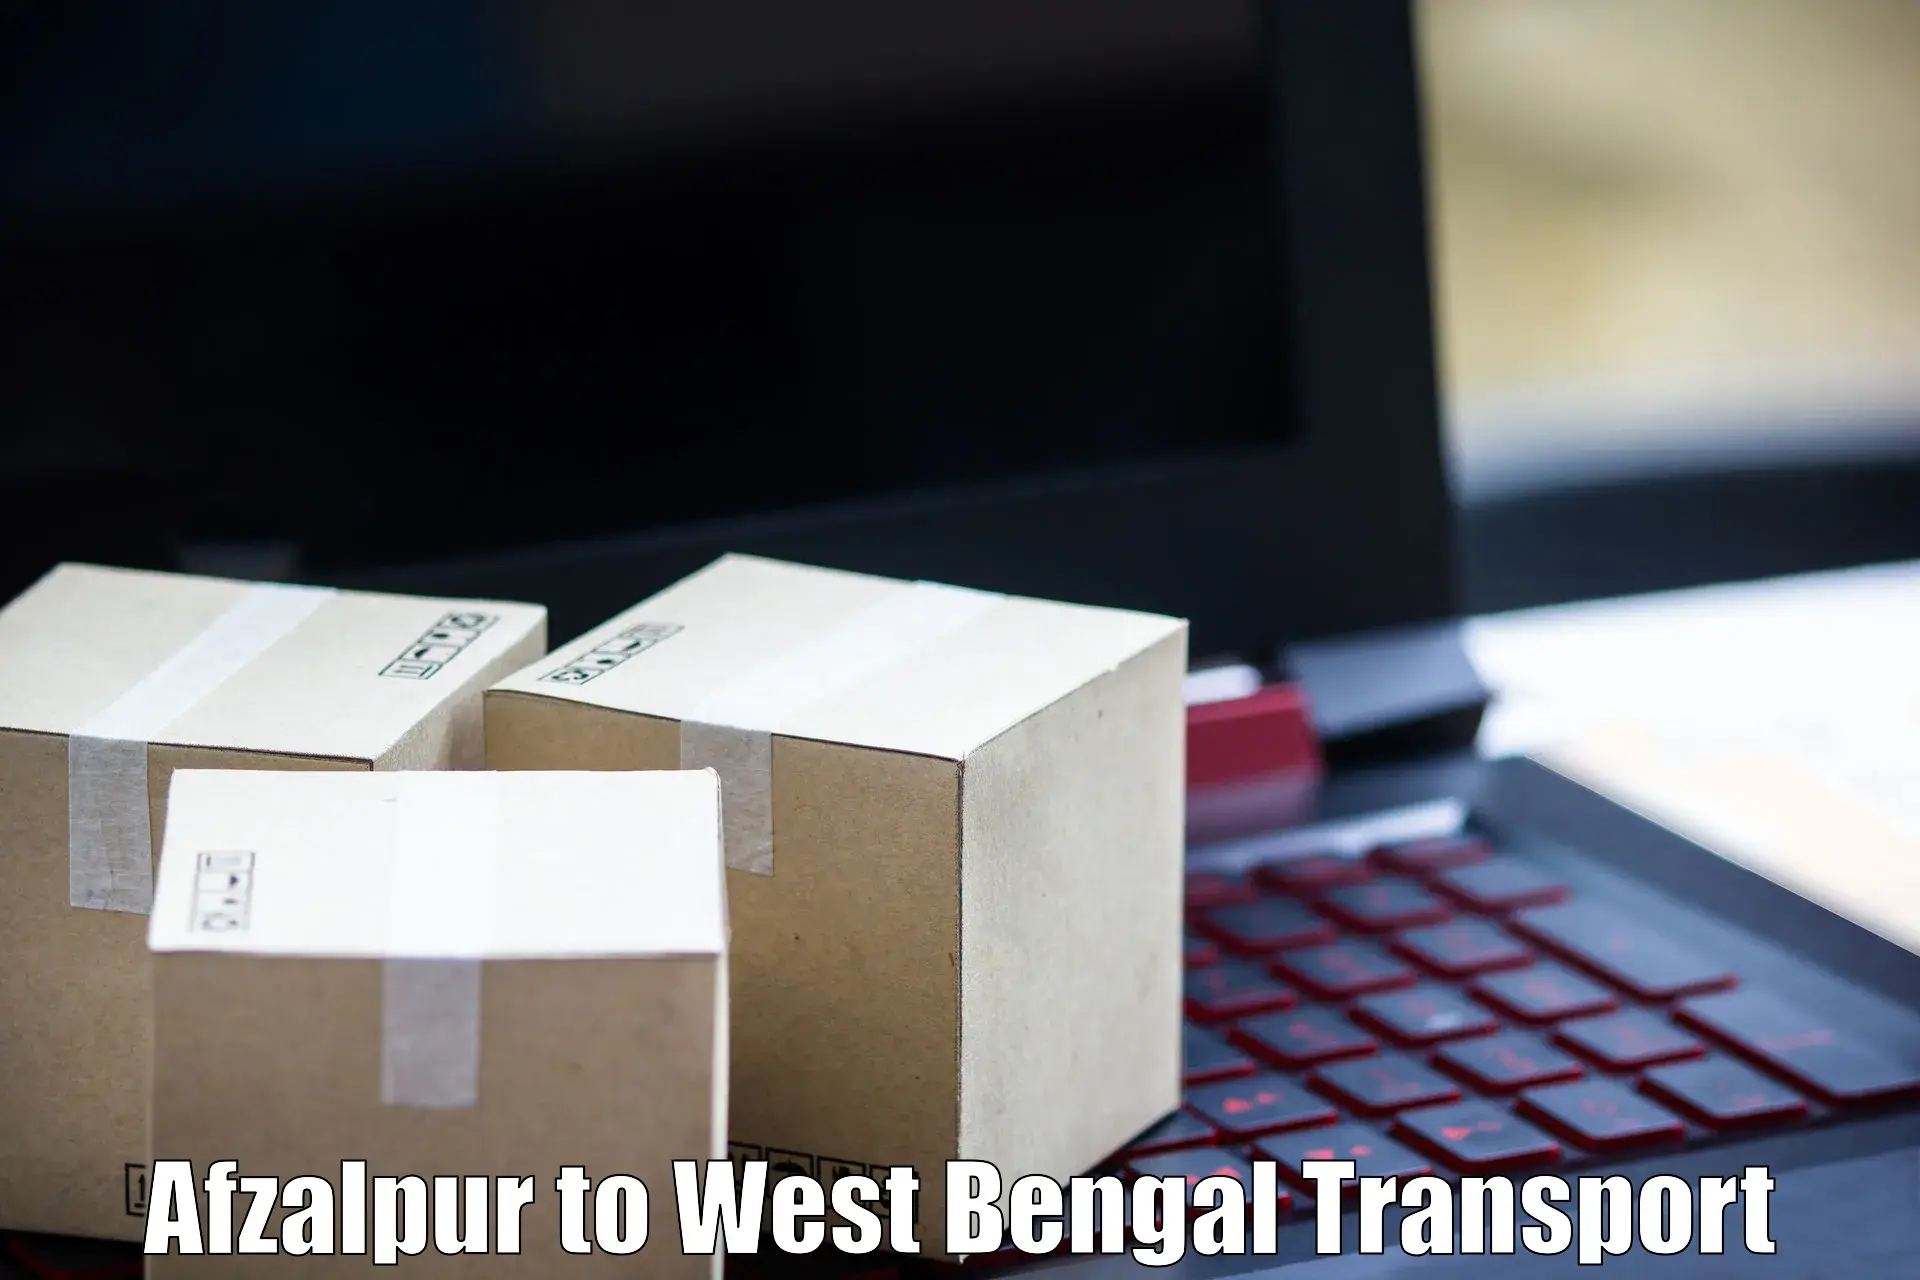 Truck transport companies in India in Afzalpur to Midnapore